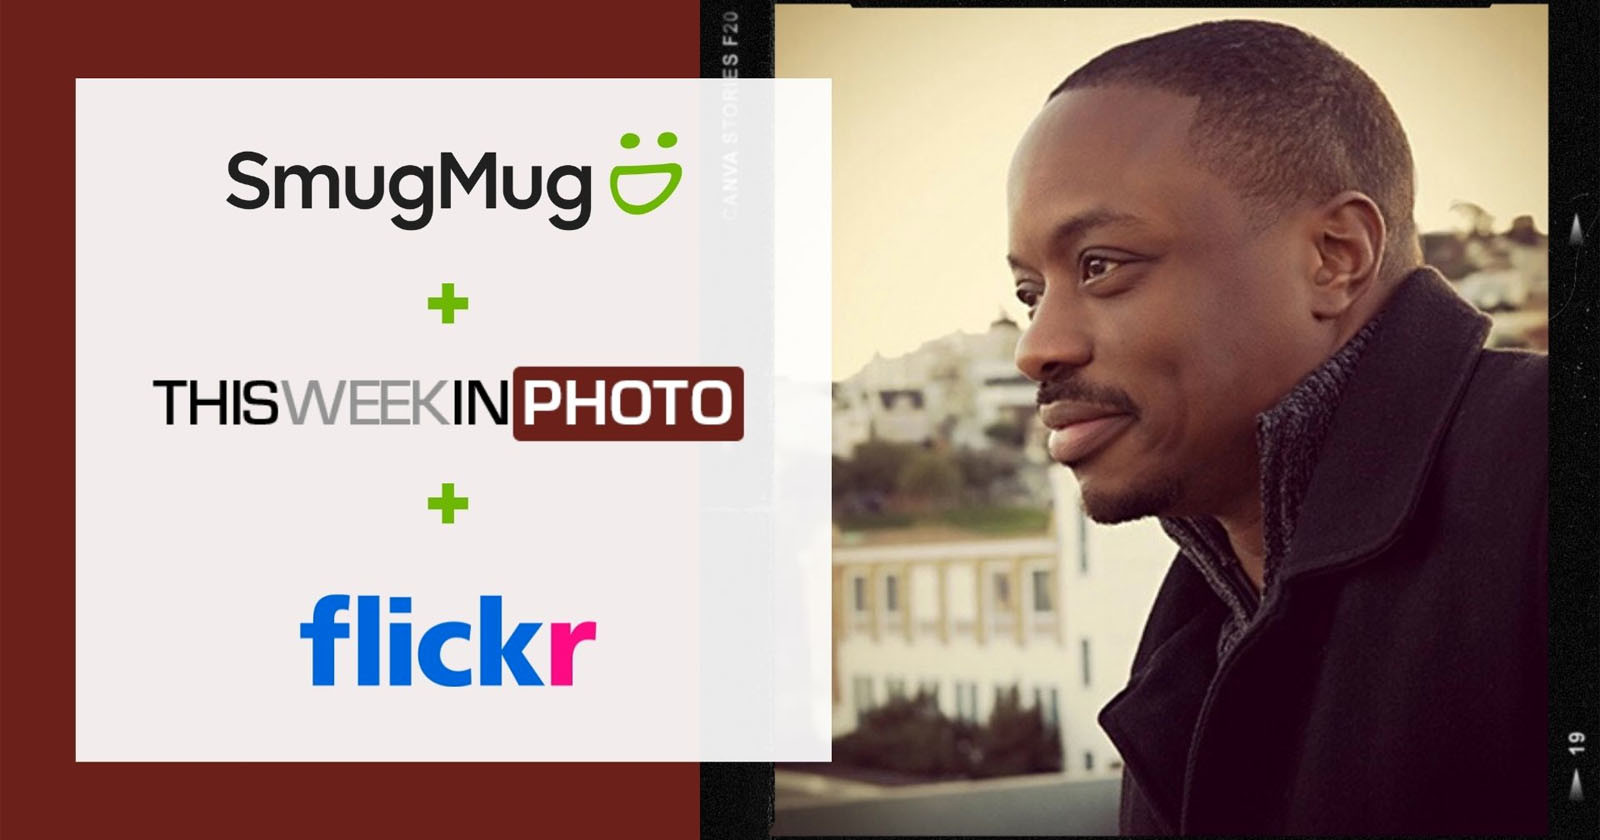 SmugMug Has Acquired the This Week in Photo Media Network